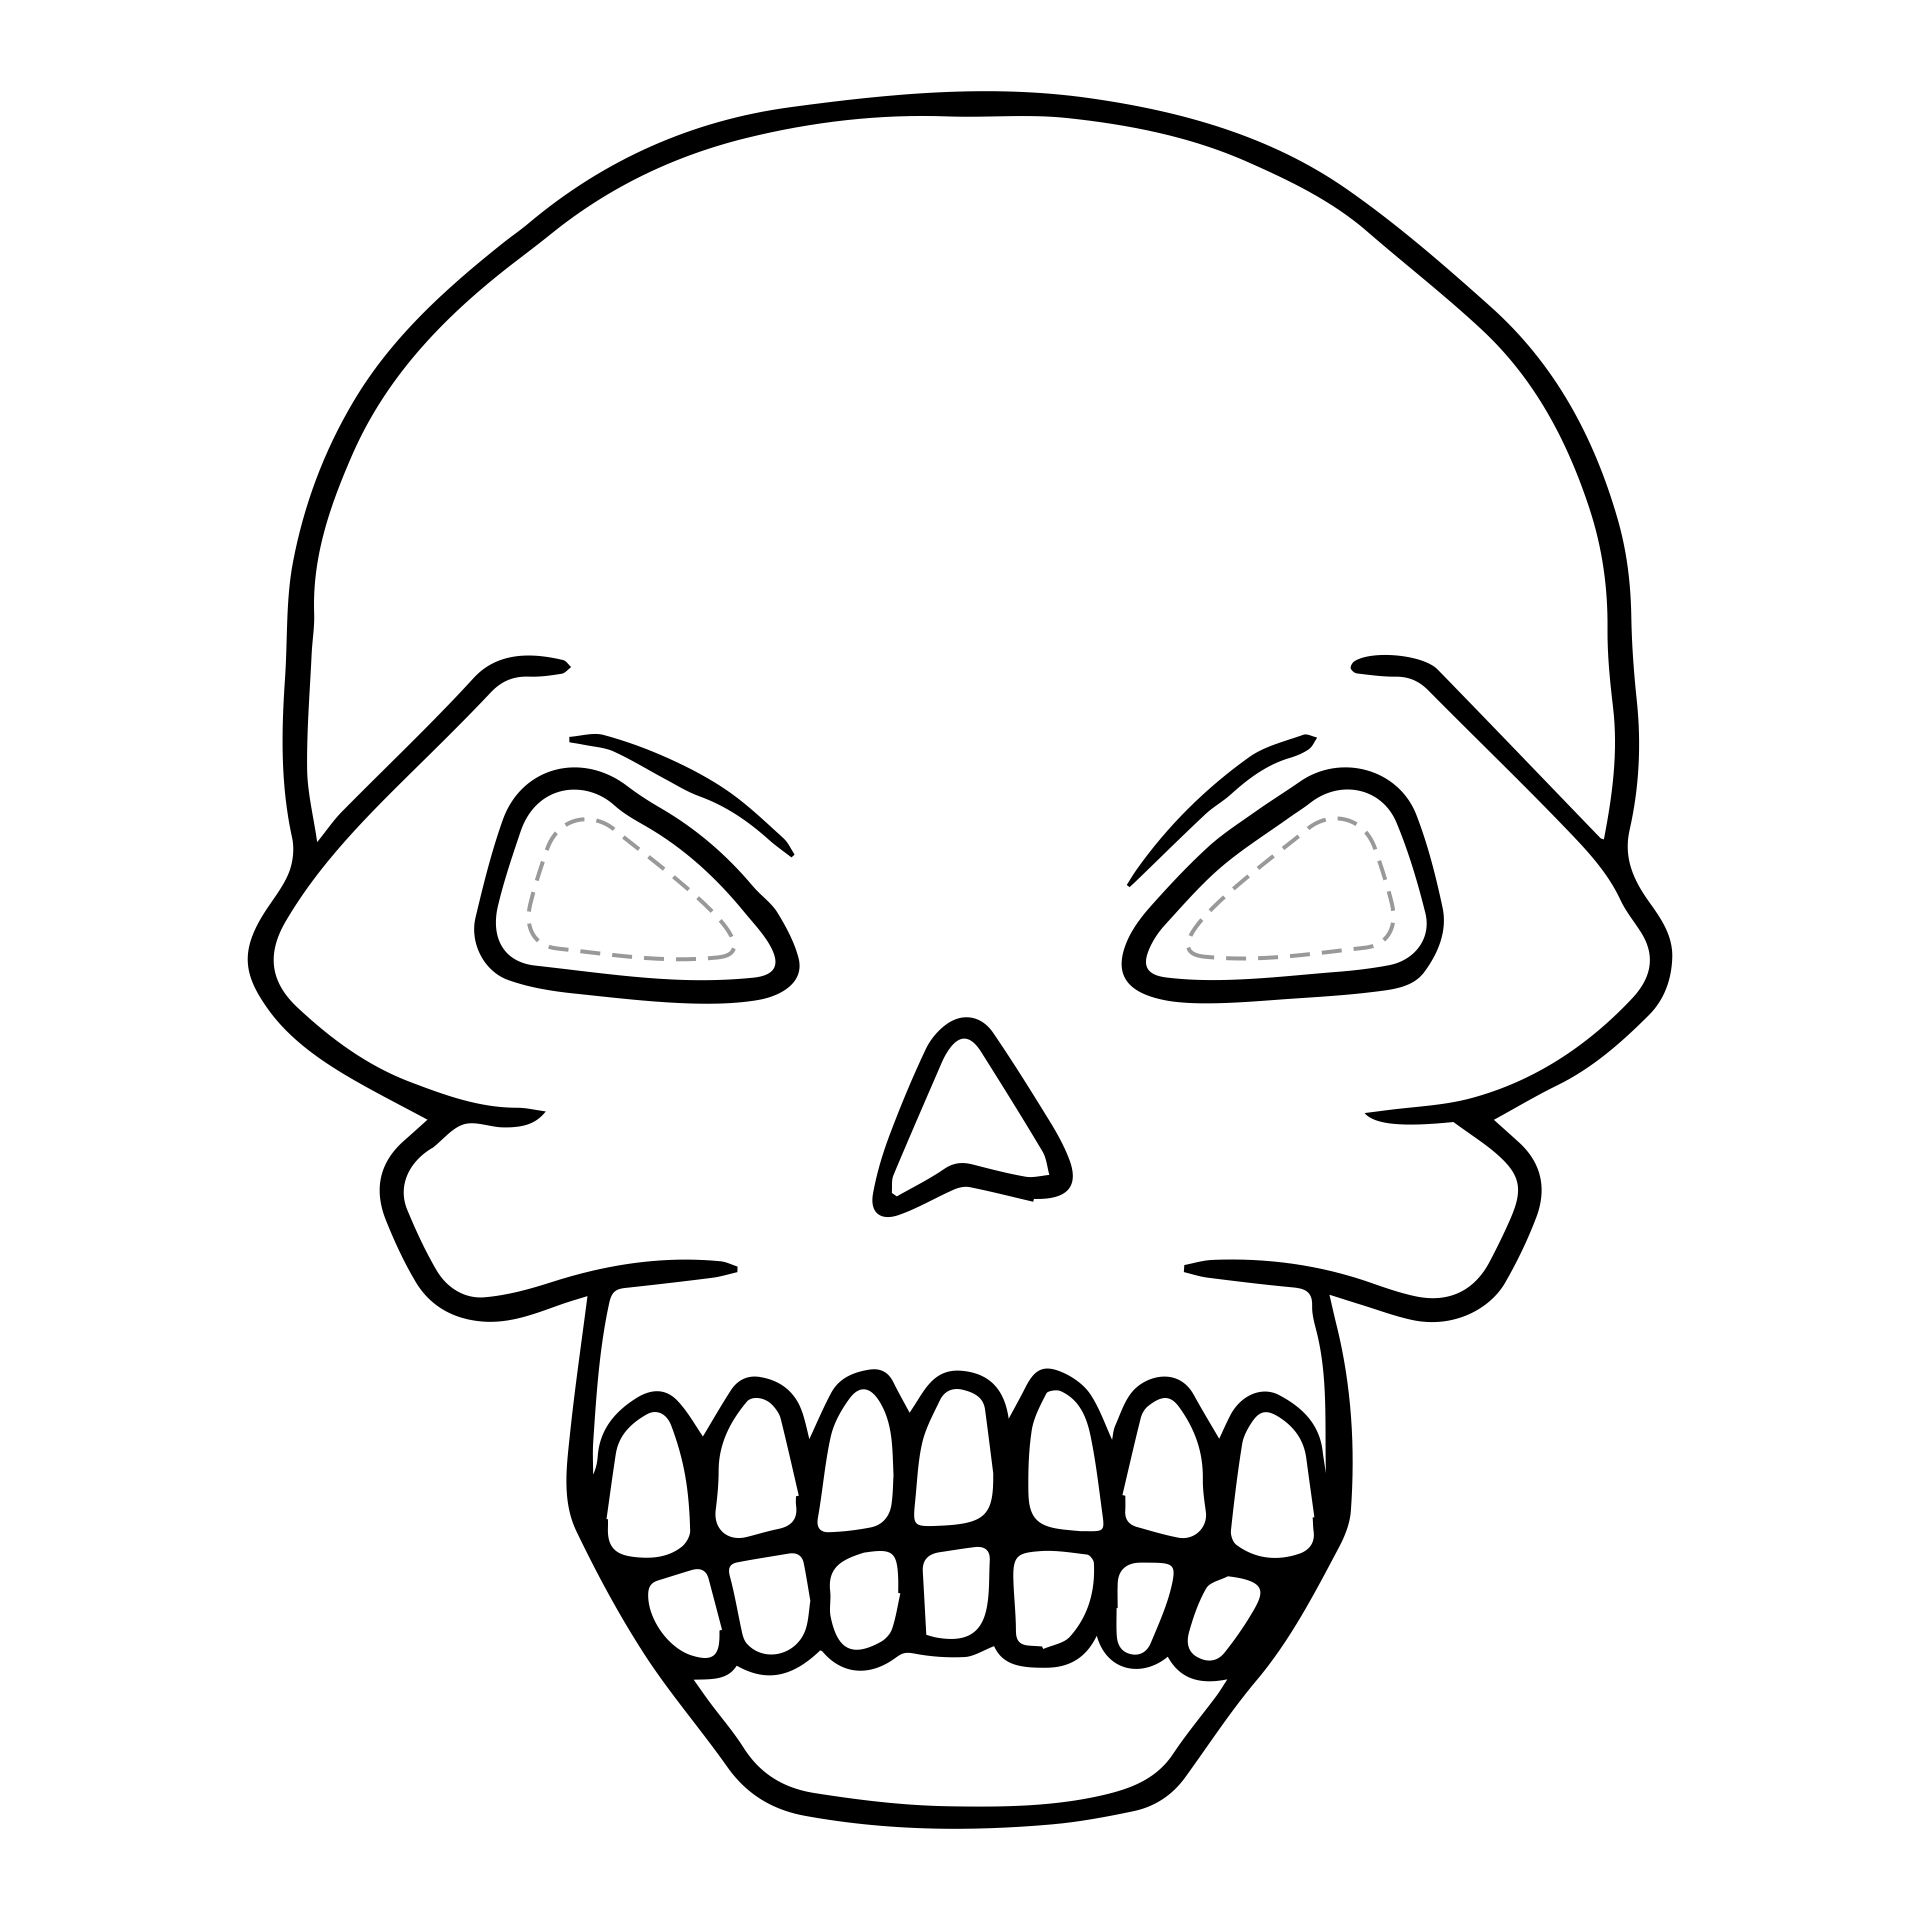 15 Best Halloween Mask Printable Coloring Pages PDF for Free at Printablee